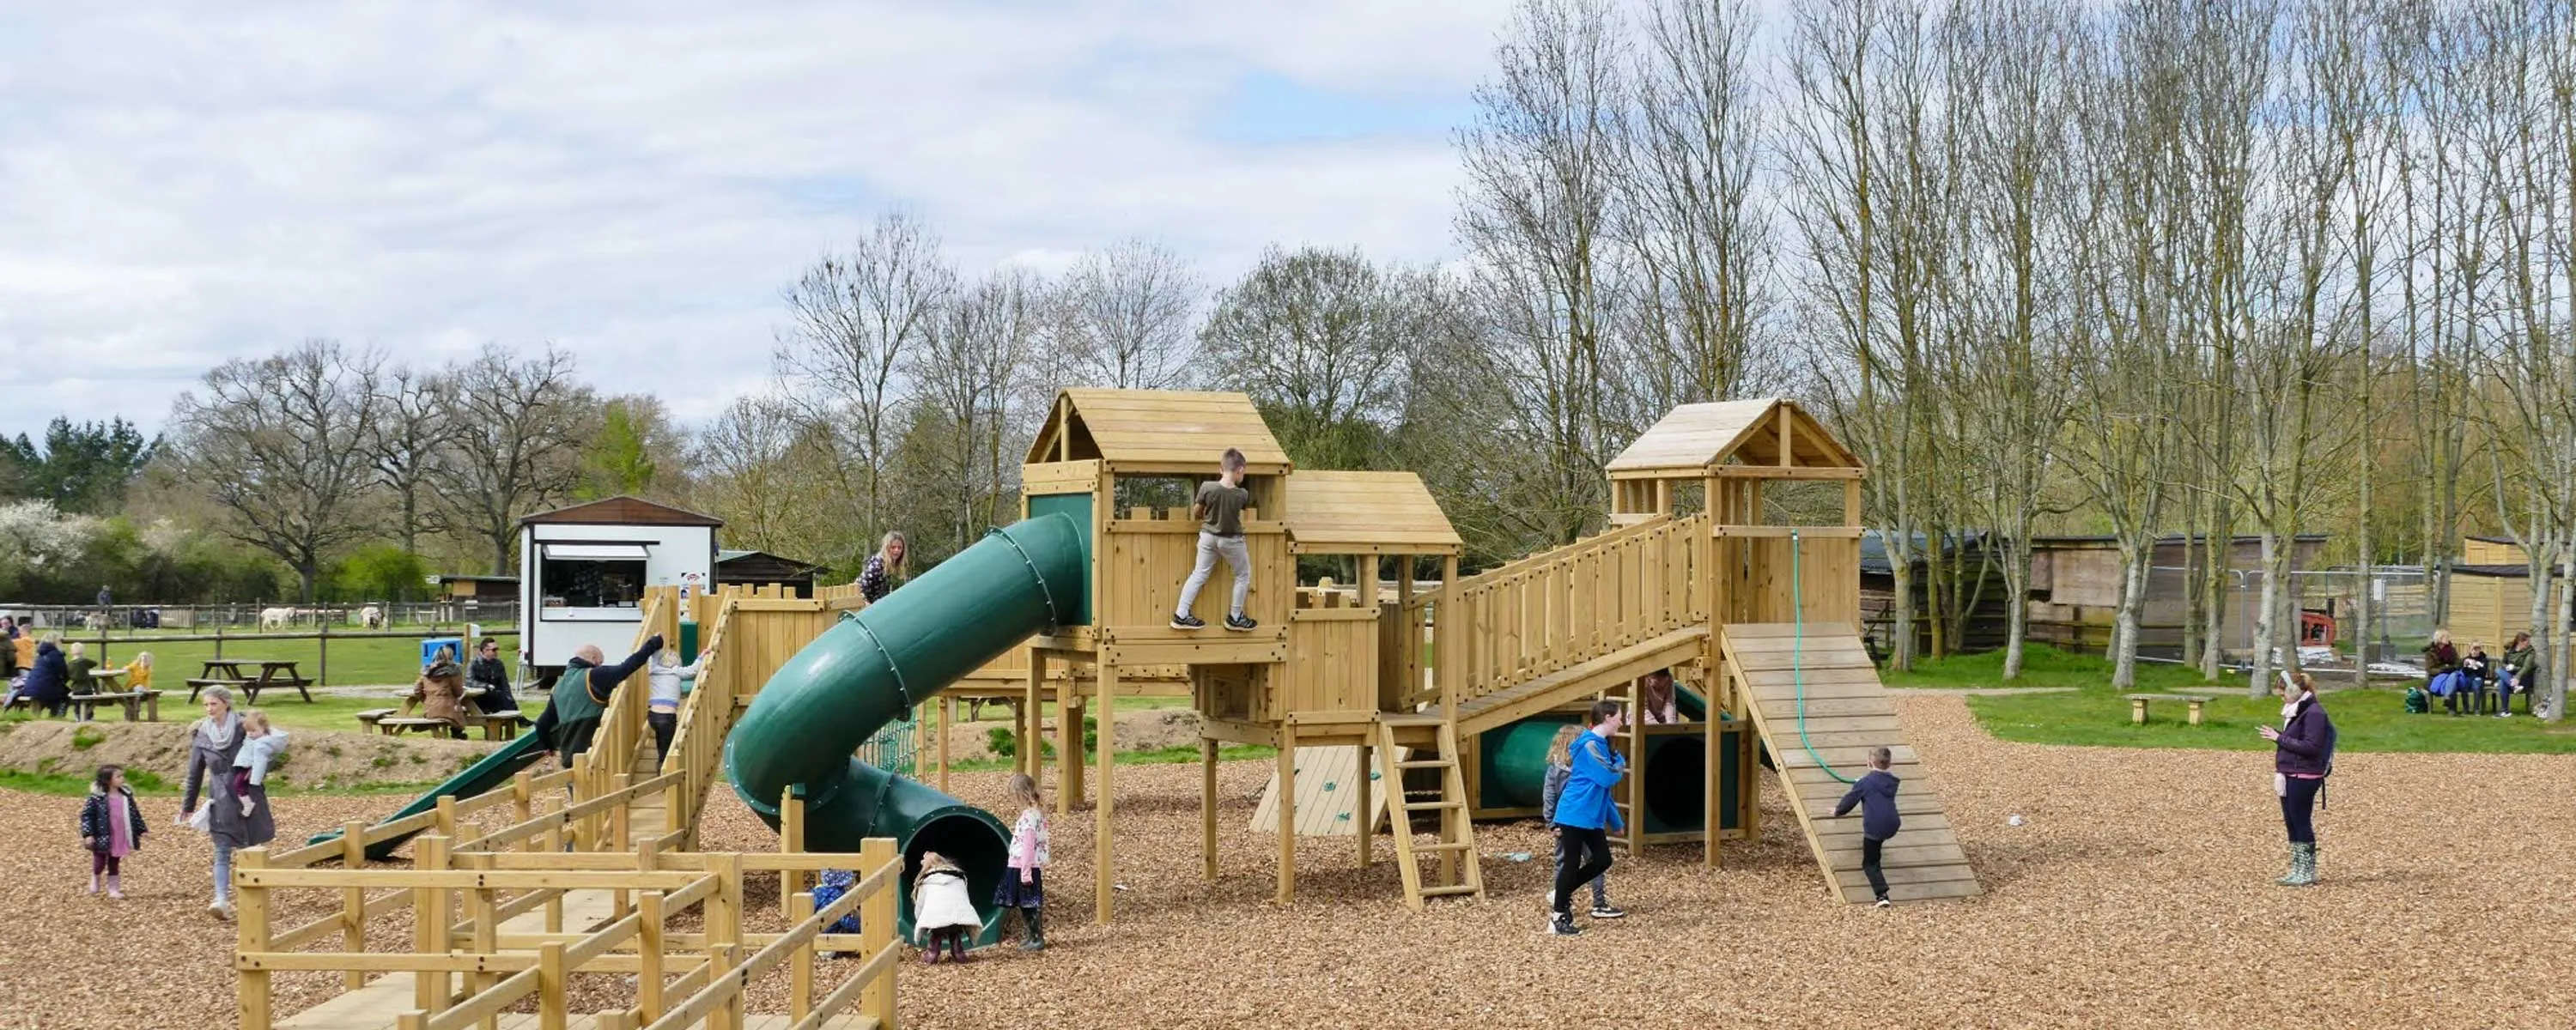 Leisure attraction play area